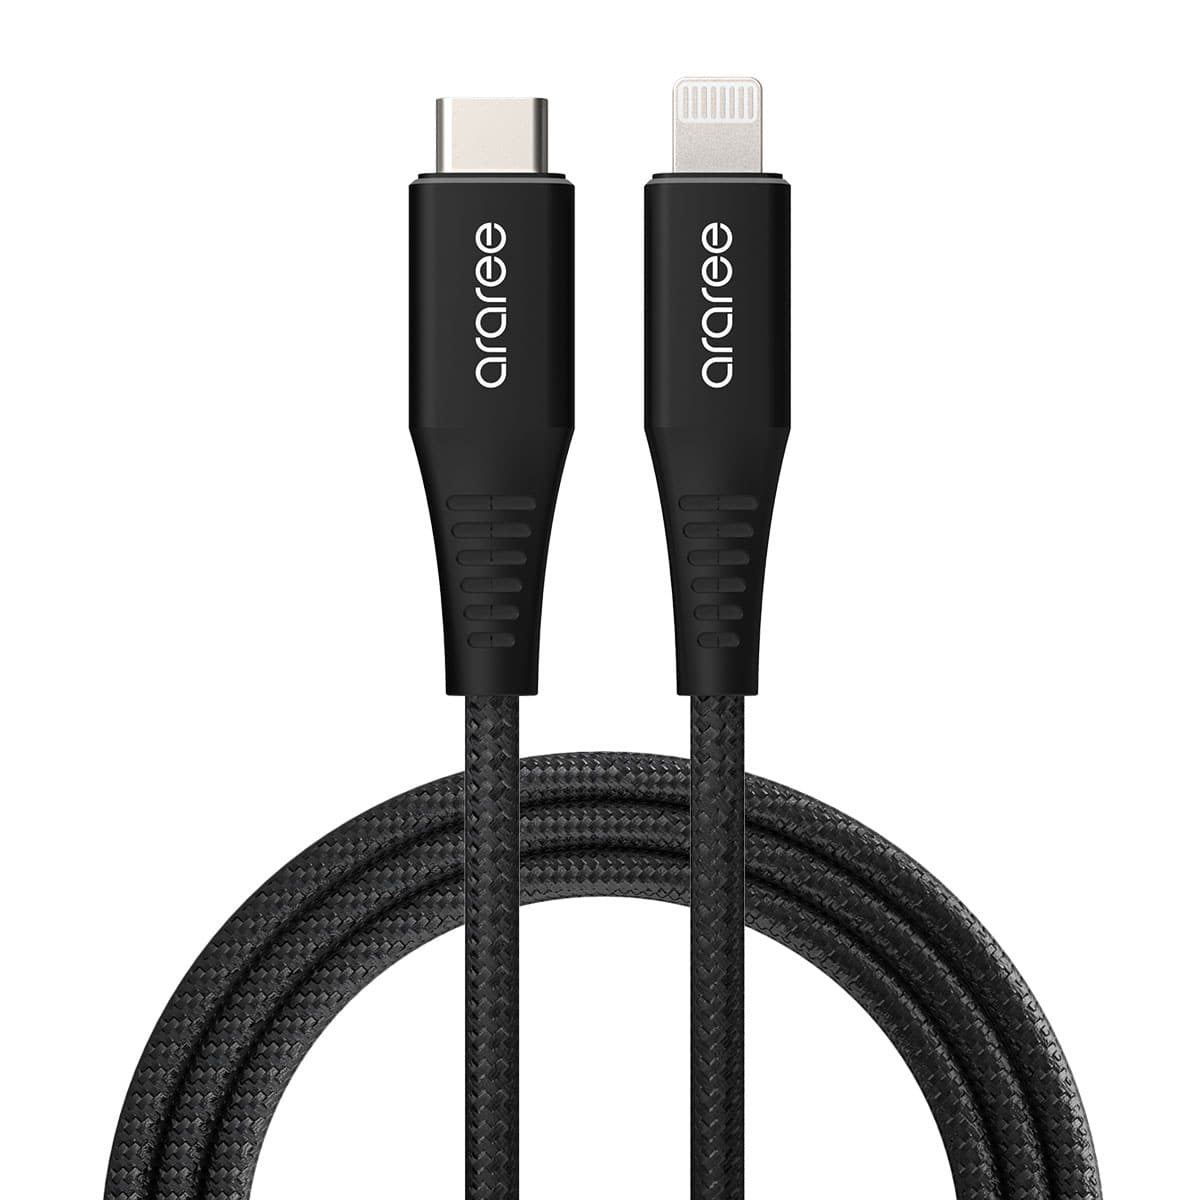 C TO LIGHTNING CABLE